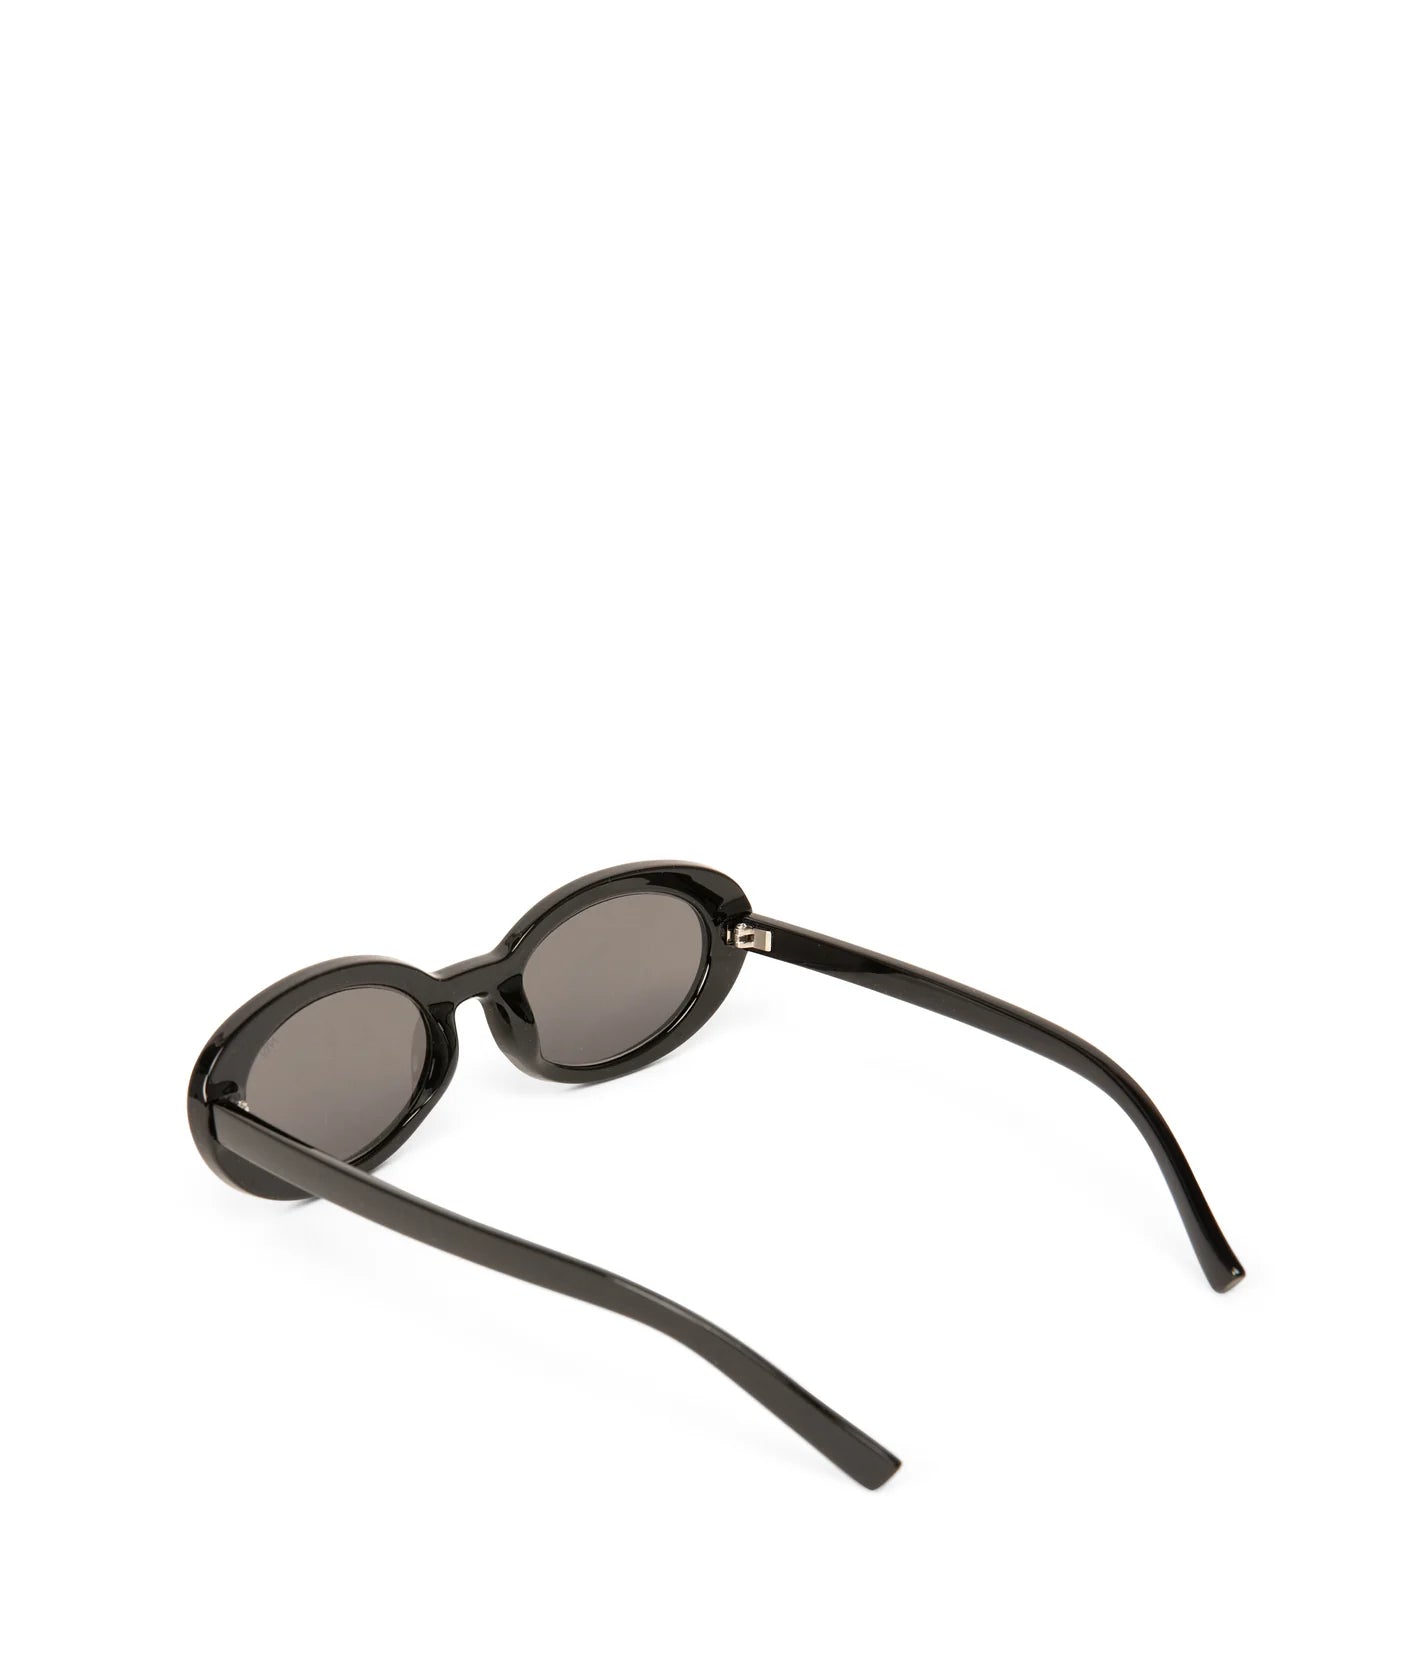 Miela Recycled Sunglasses by Mat and Nat